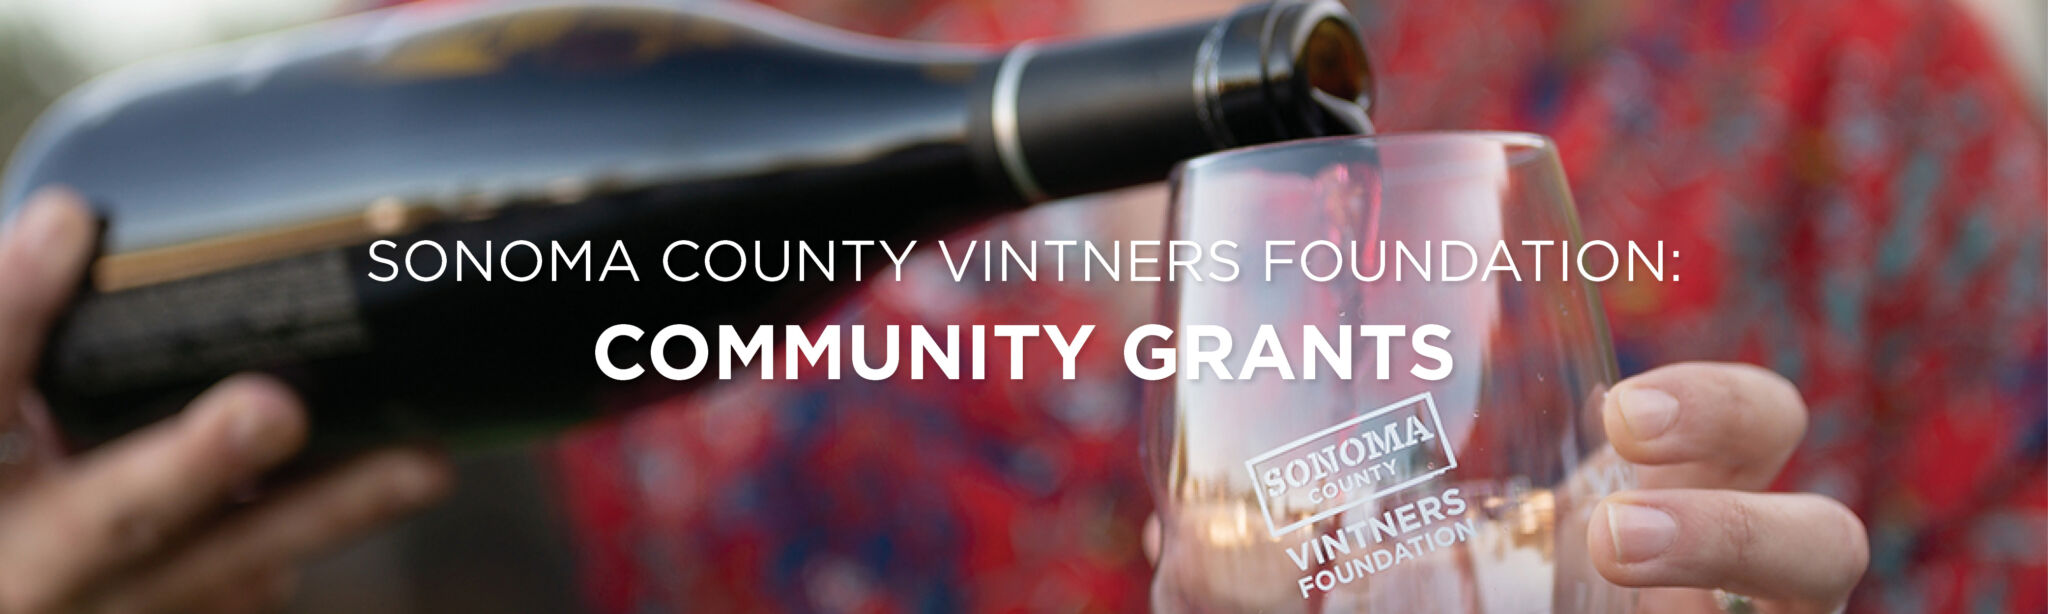 Wine being poured into a glass. Text: Sonoma County Vintners Foundation Community Grants program